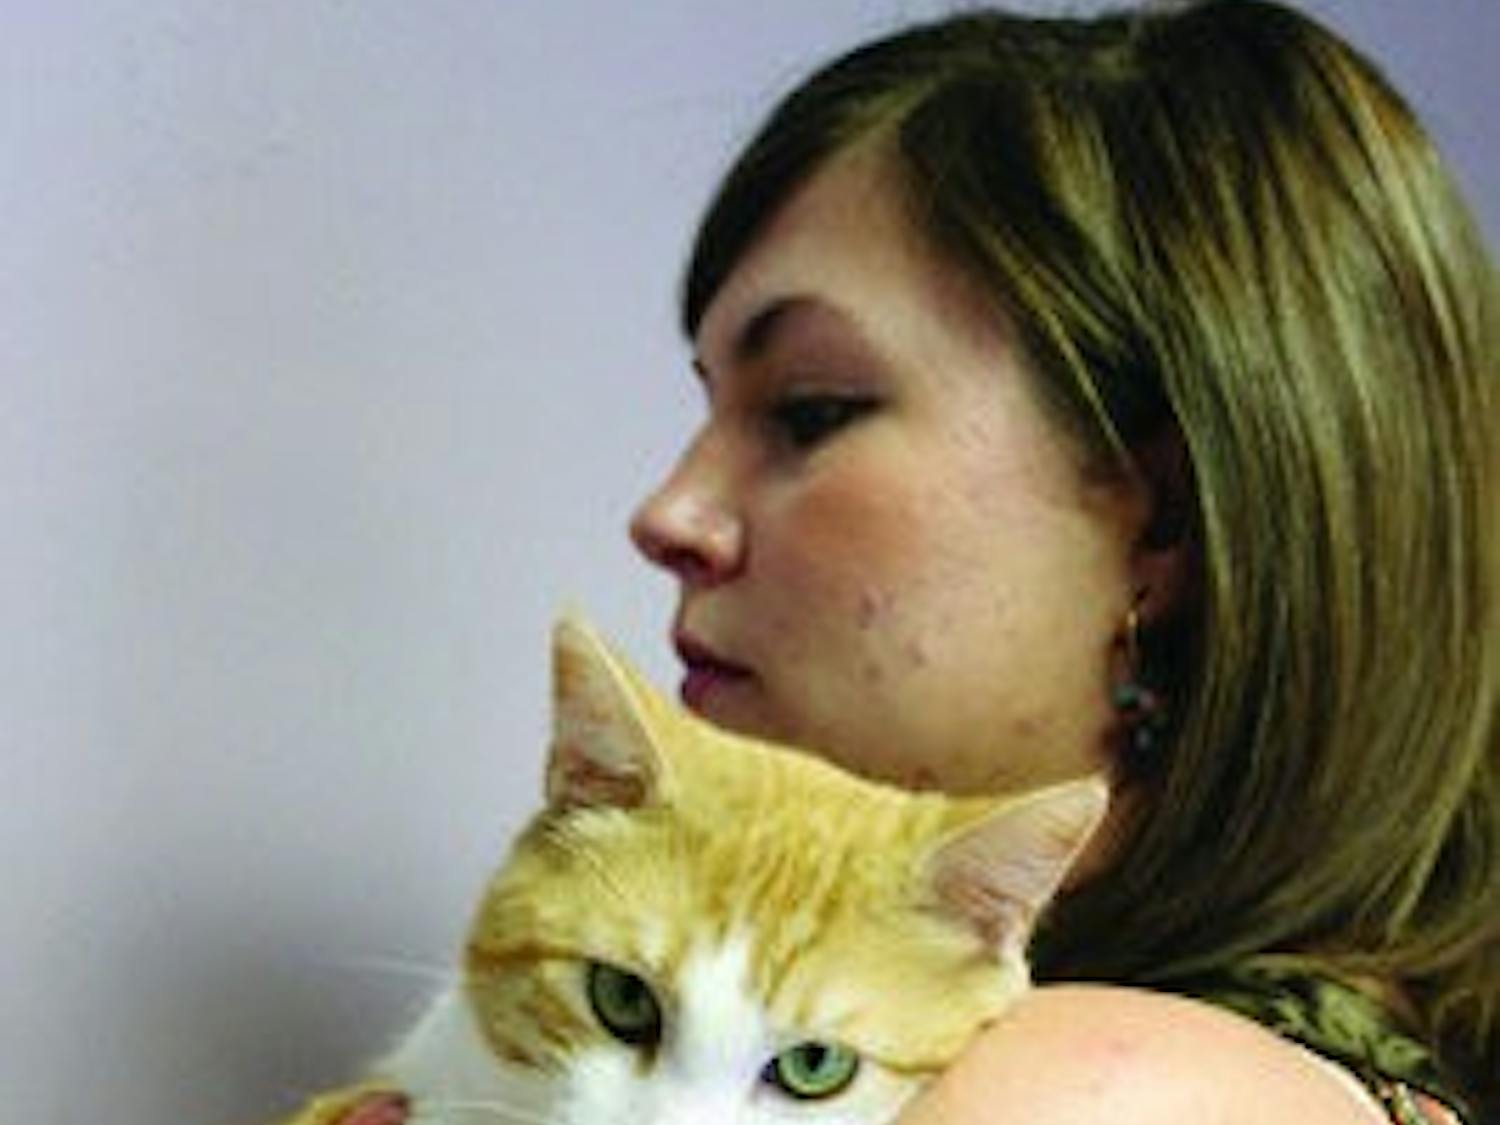 Stacee Peer loves on cat looking for adoption. (Alex Sager / PHOTO EDITOR)